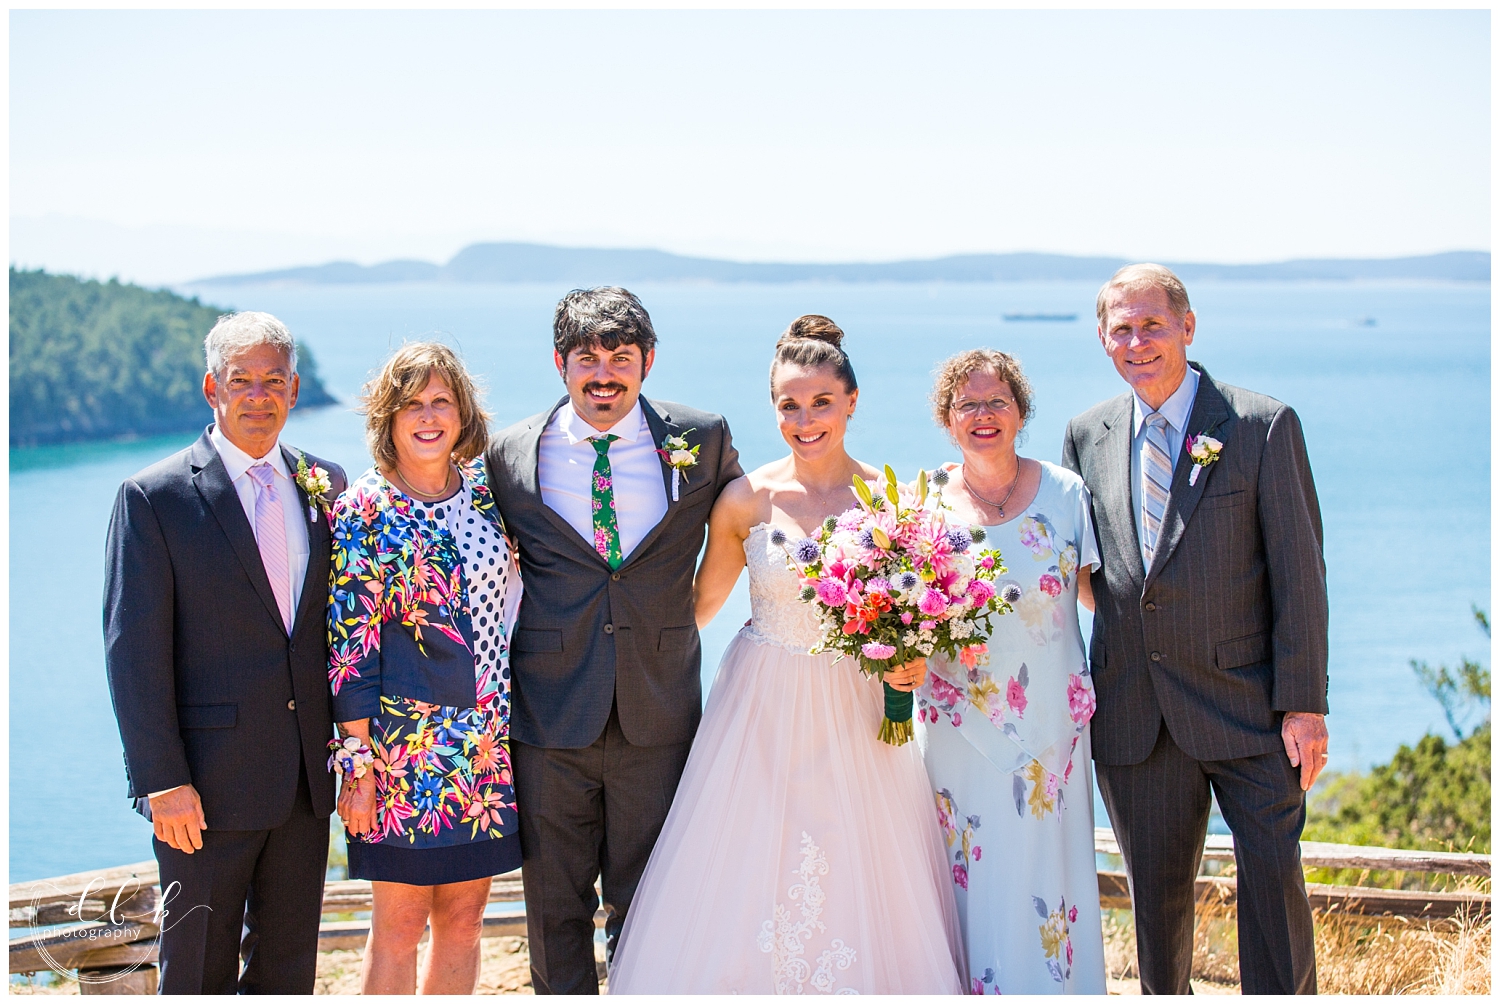 family portraits for wildflower-themed wedding at Washington Park in Anacortes